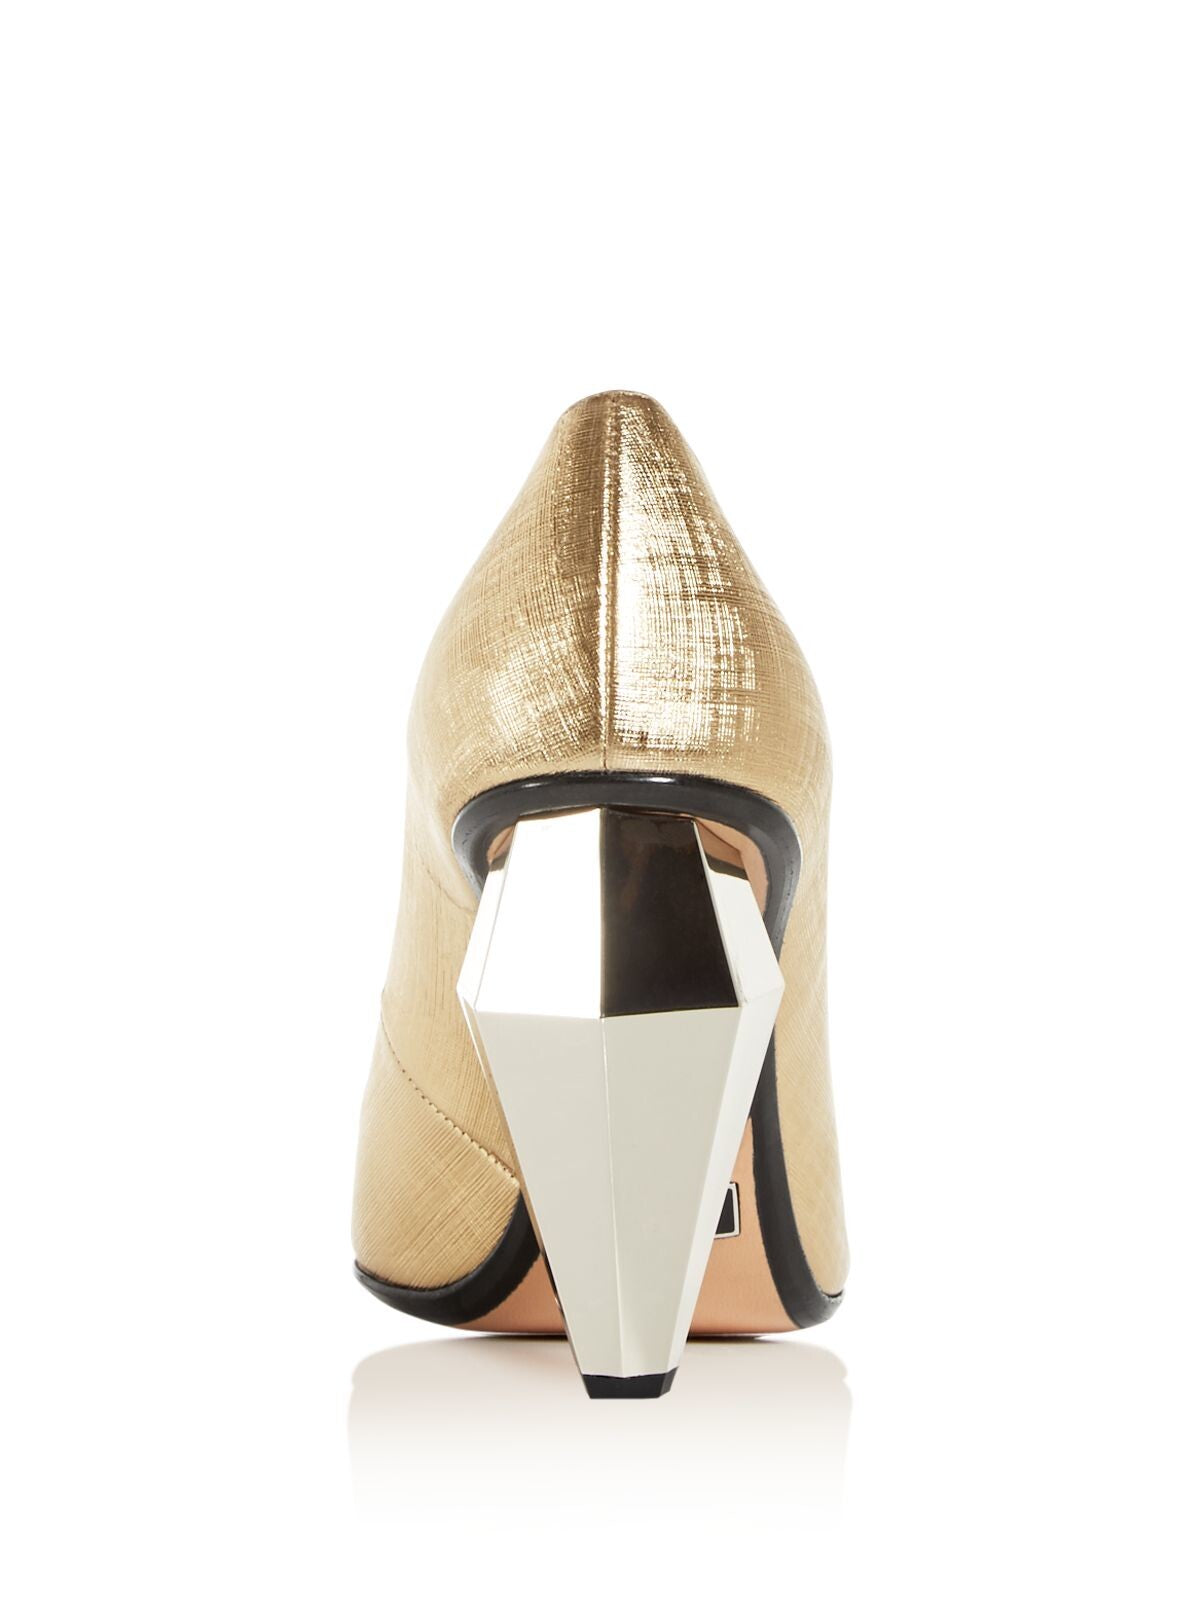 MARC JACOBS Womens Gold Comfort Metallic The Pump Pointed Toe Sculpted Heel Slip On Leather Dress Pumps Shoes 38.5